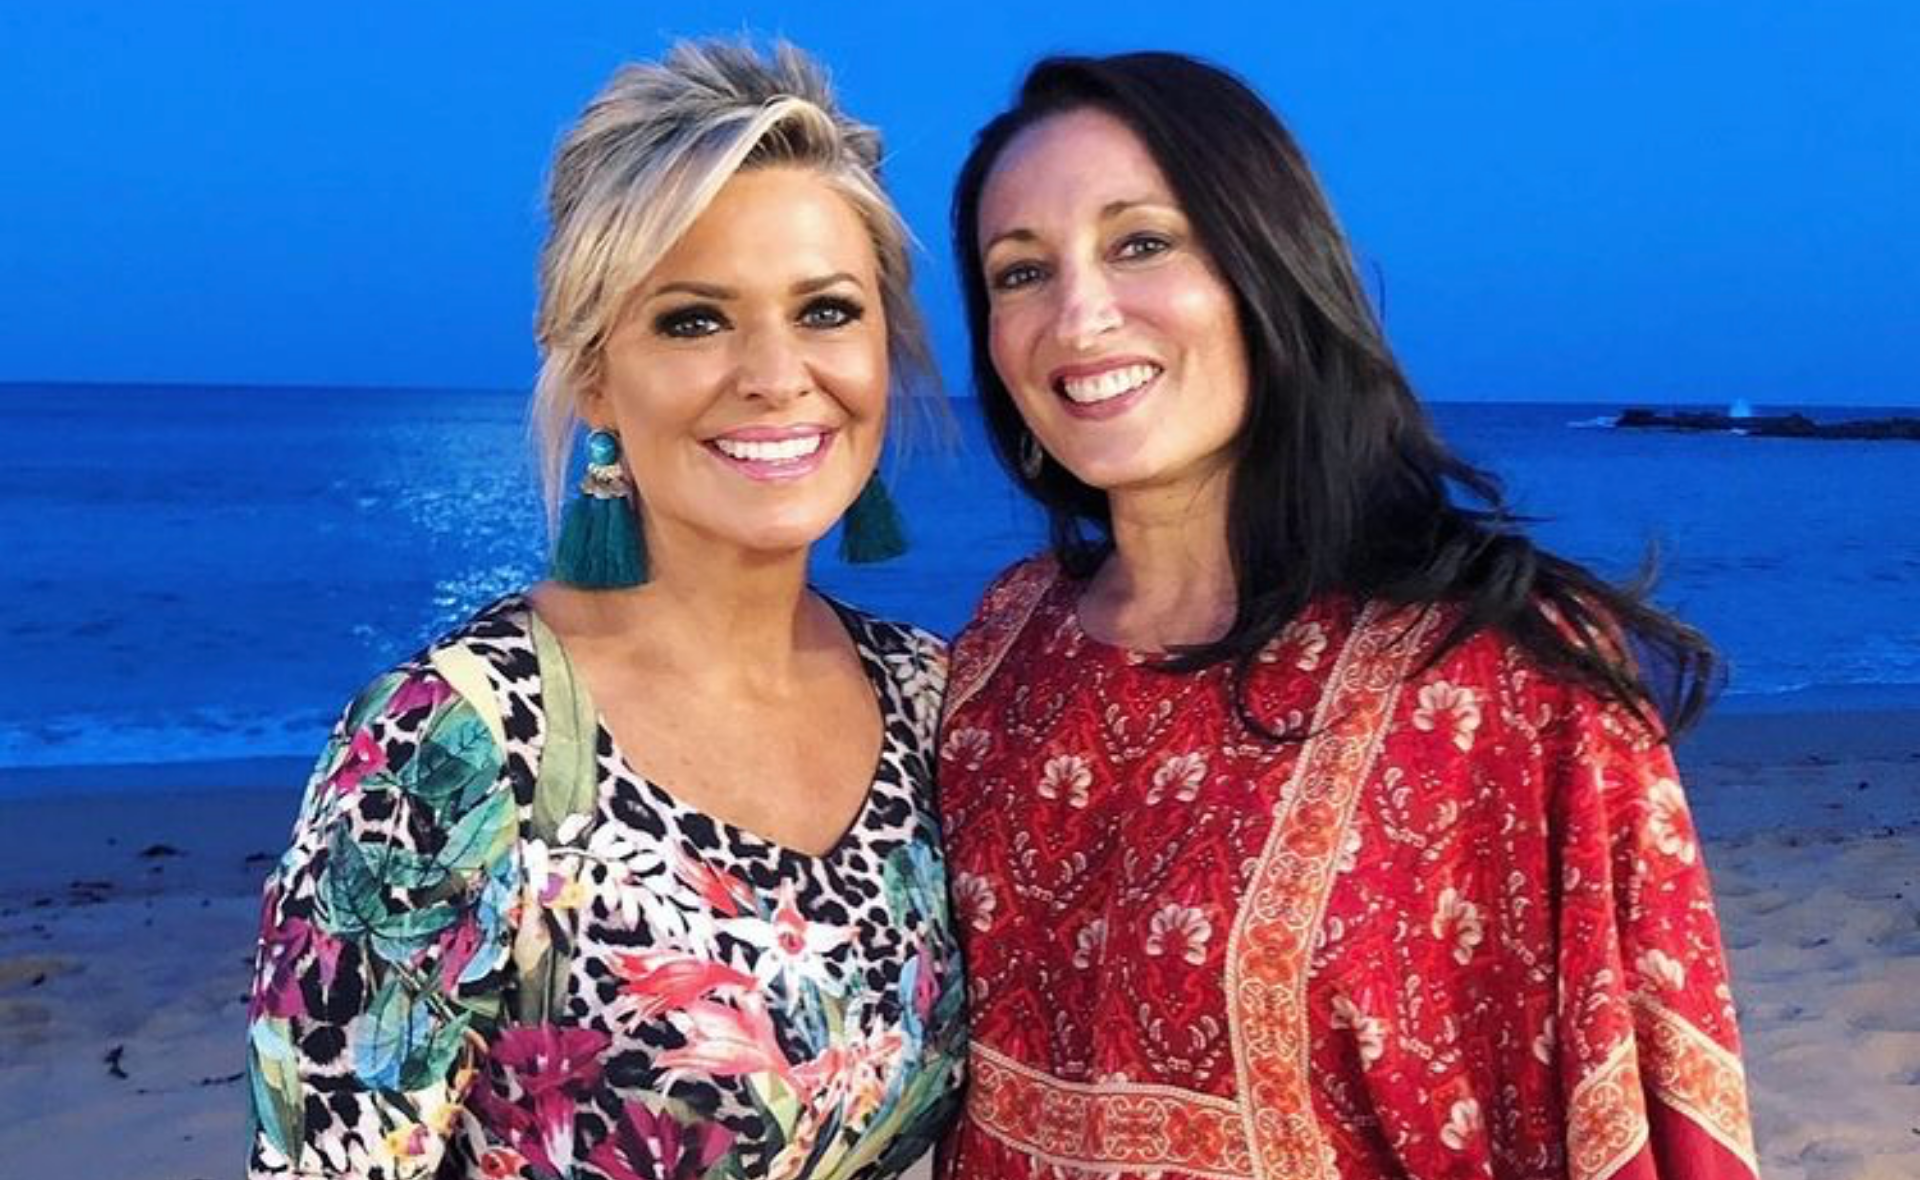 “I admire you enormously”: Home and Away stars pay tribute to Emily Symons on her 52nd birthday